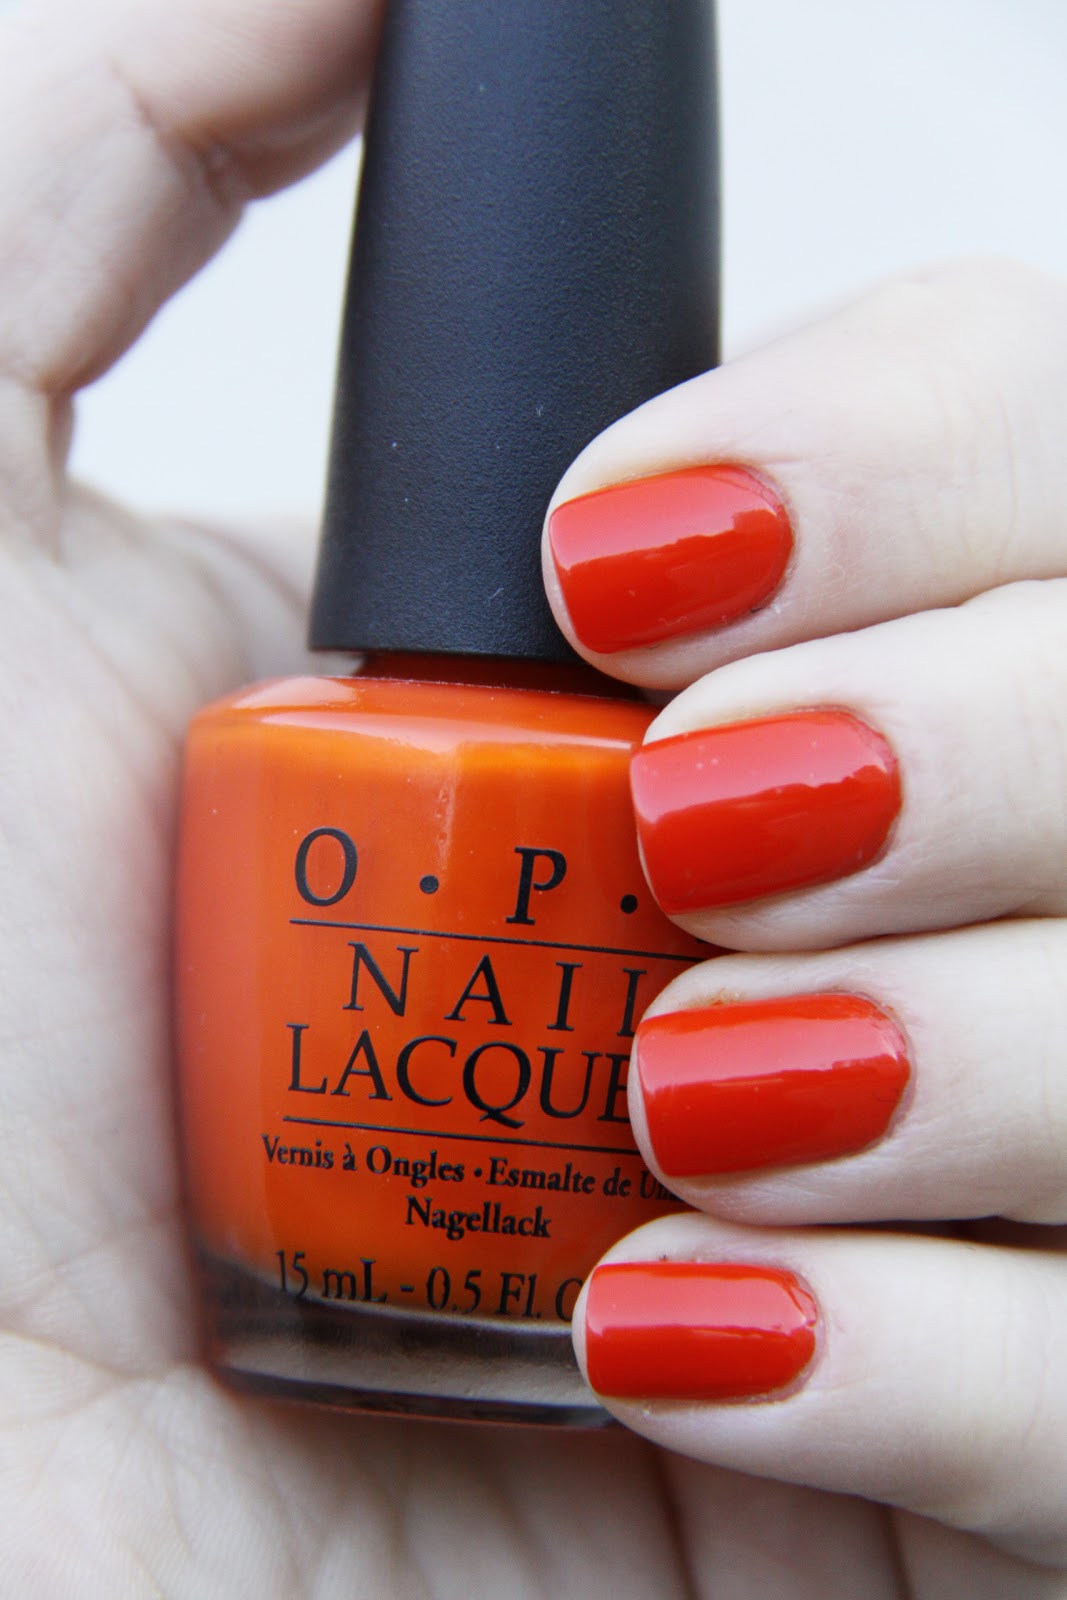 Nails by Catharina: OPI A roll in the hague